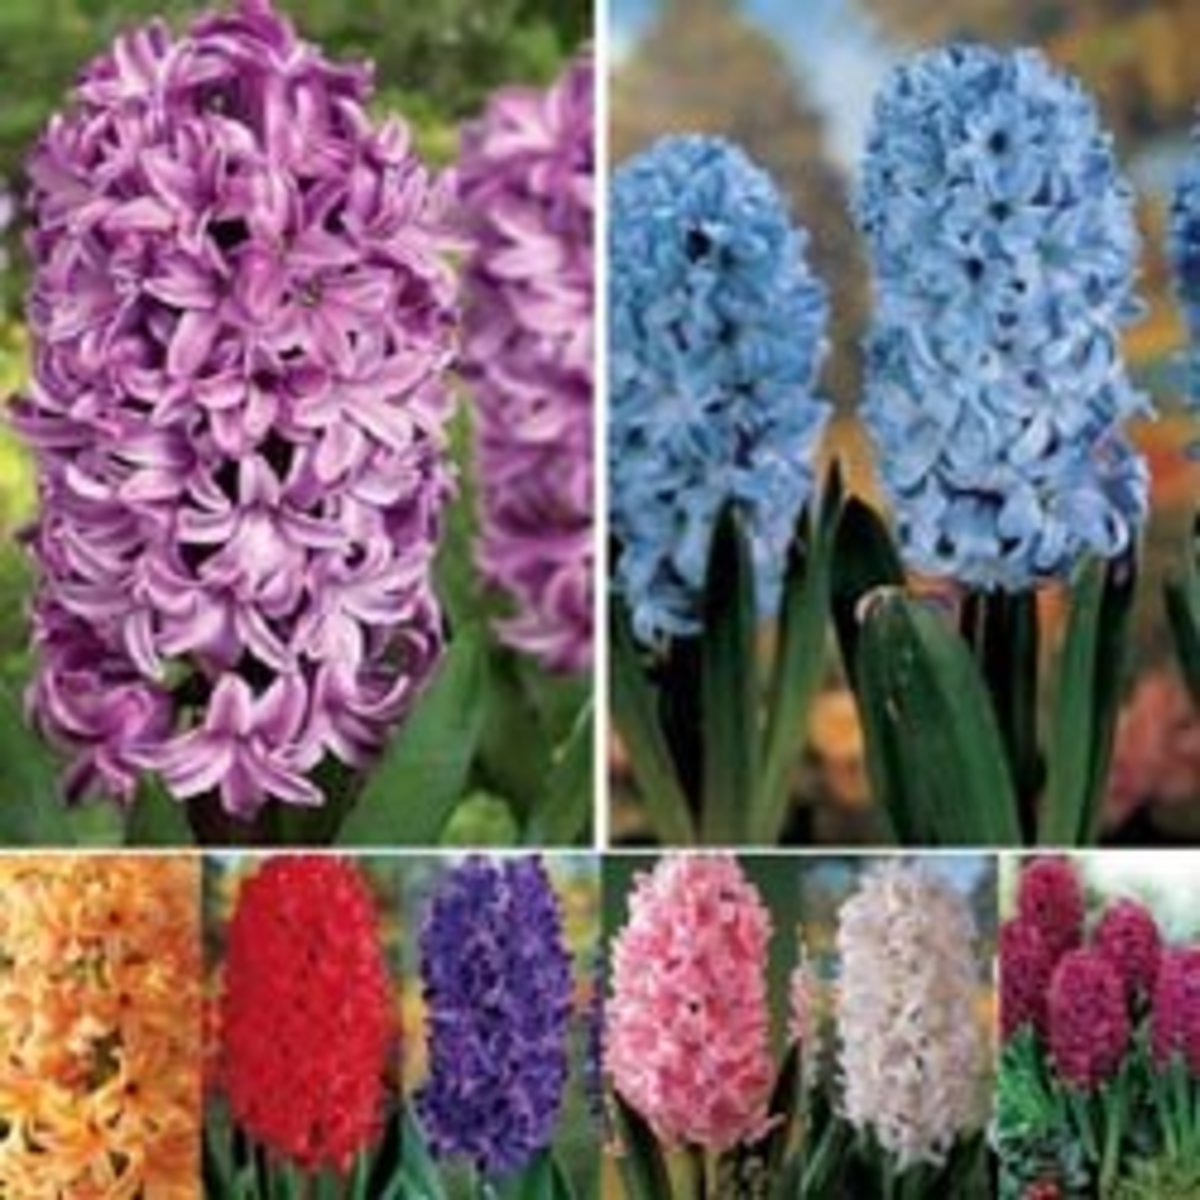 Available from Amazon: Fragrant Hyacinth Collection Specialty Bulbs By Van Bourgondien 87723-52